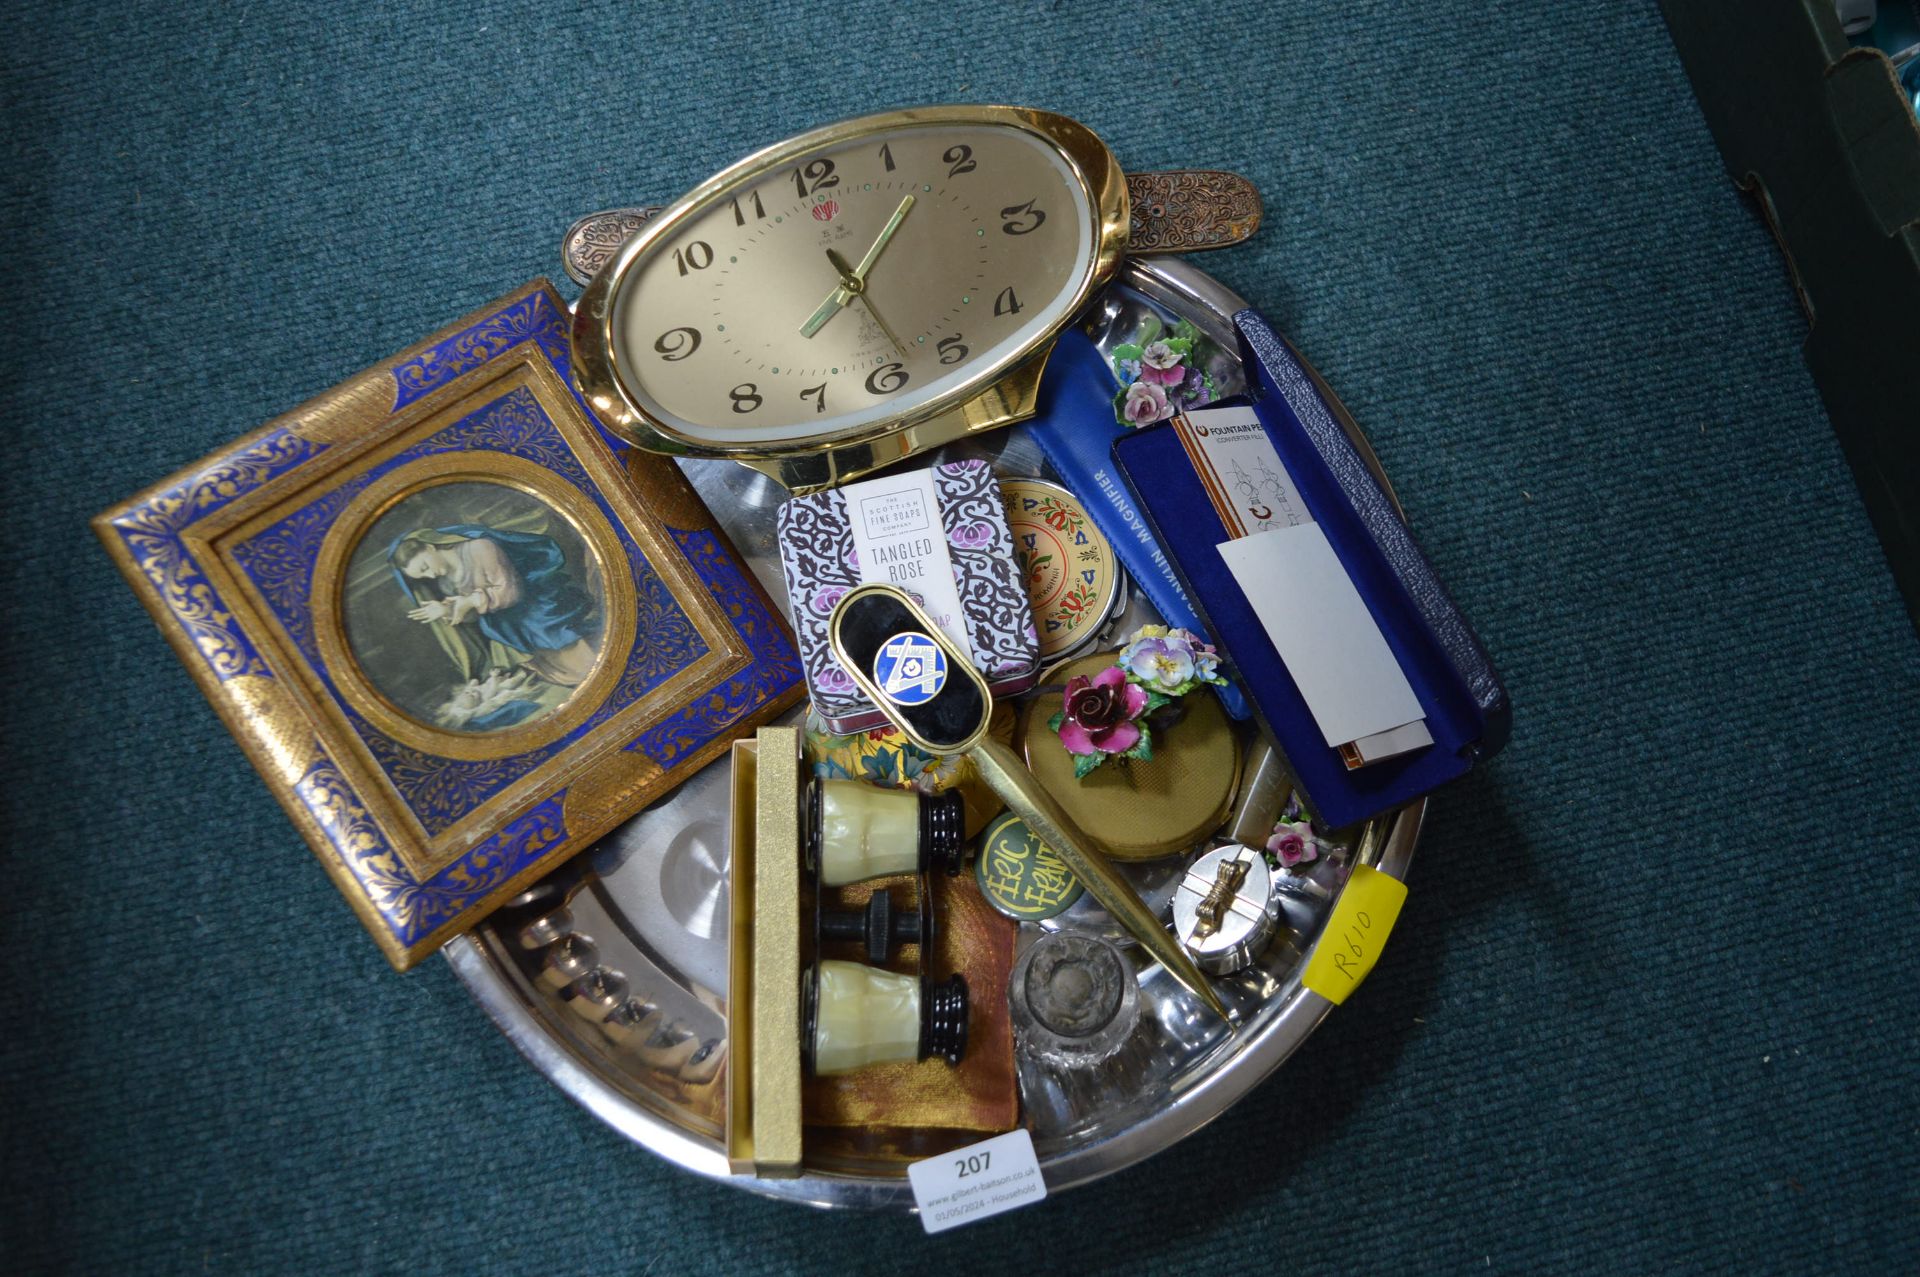 Tray of Decorative Items, Compacts, etc.